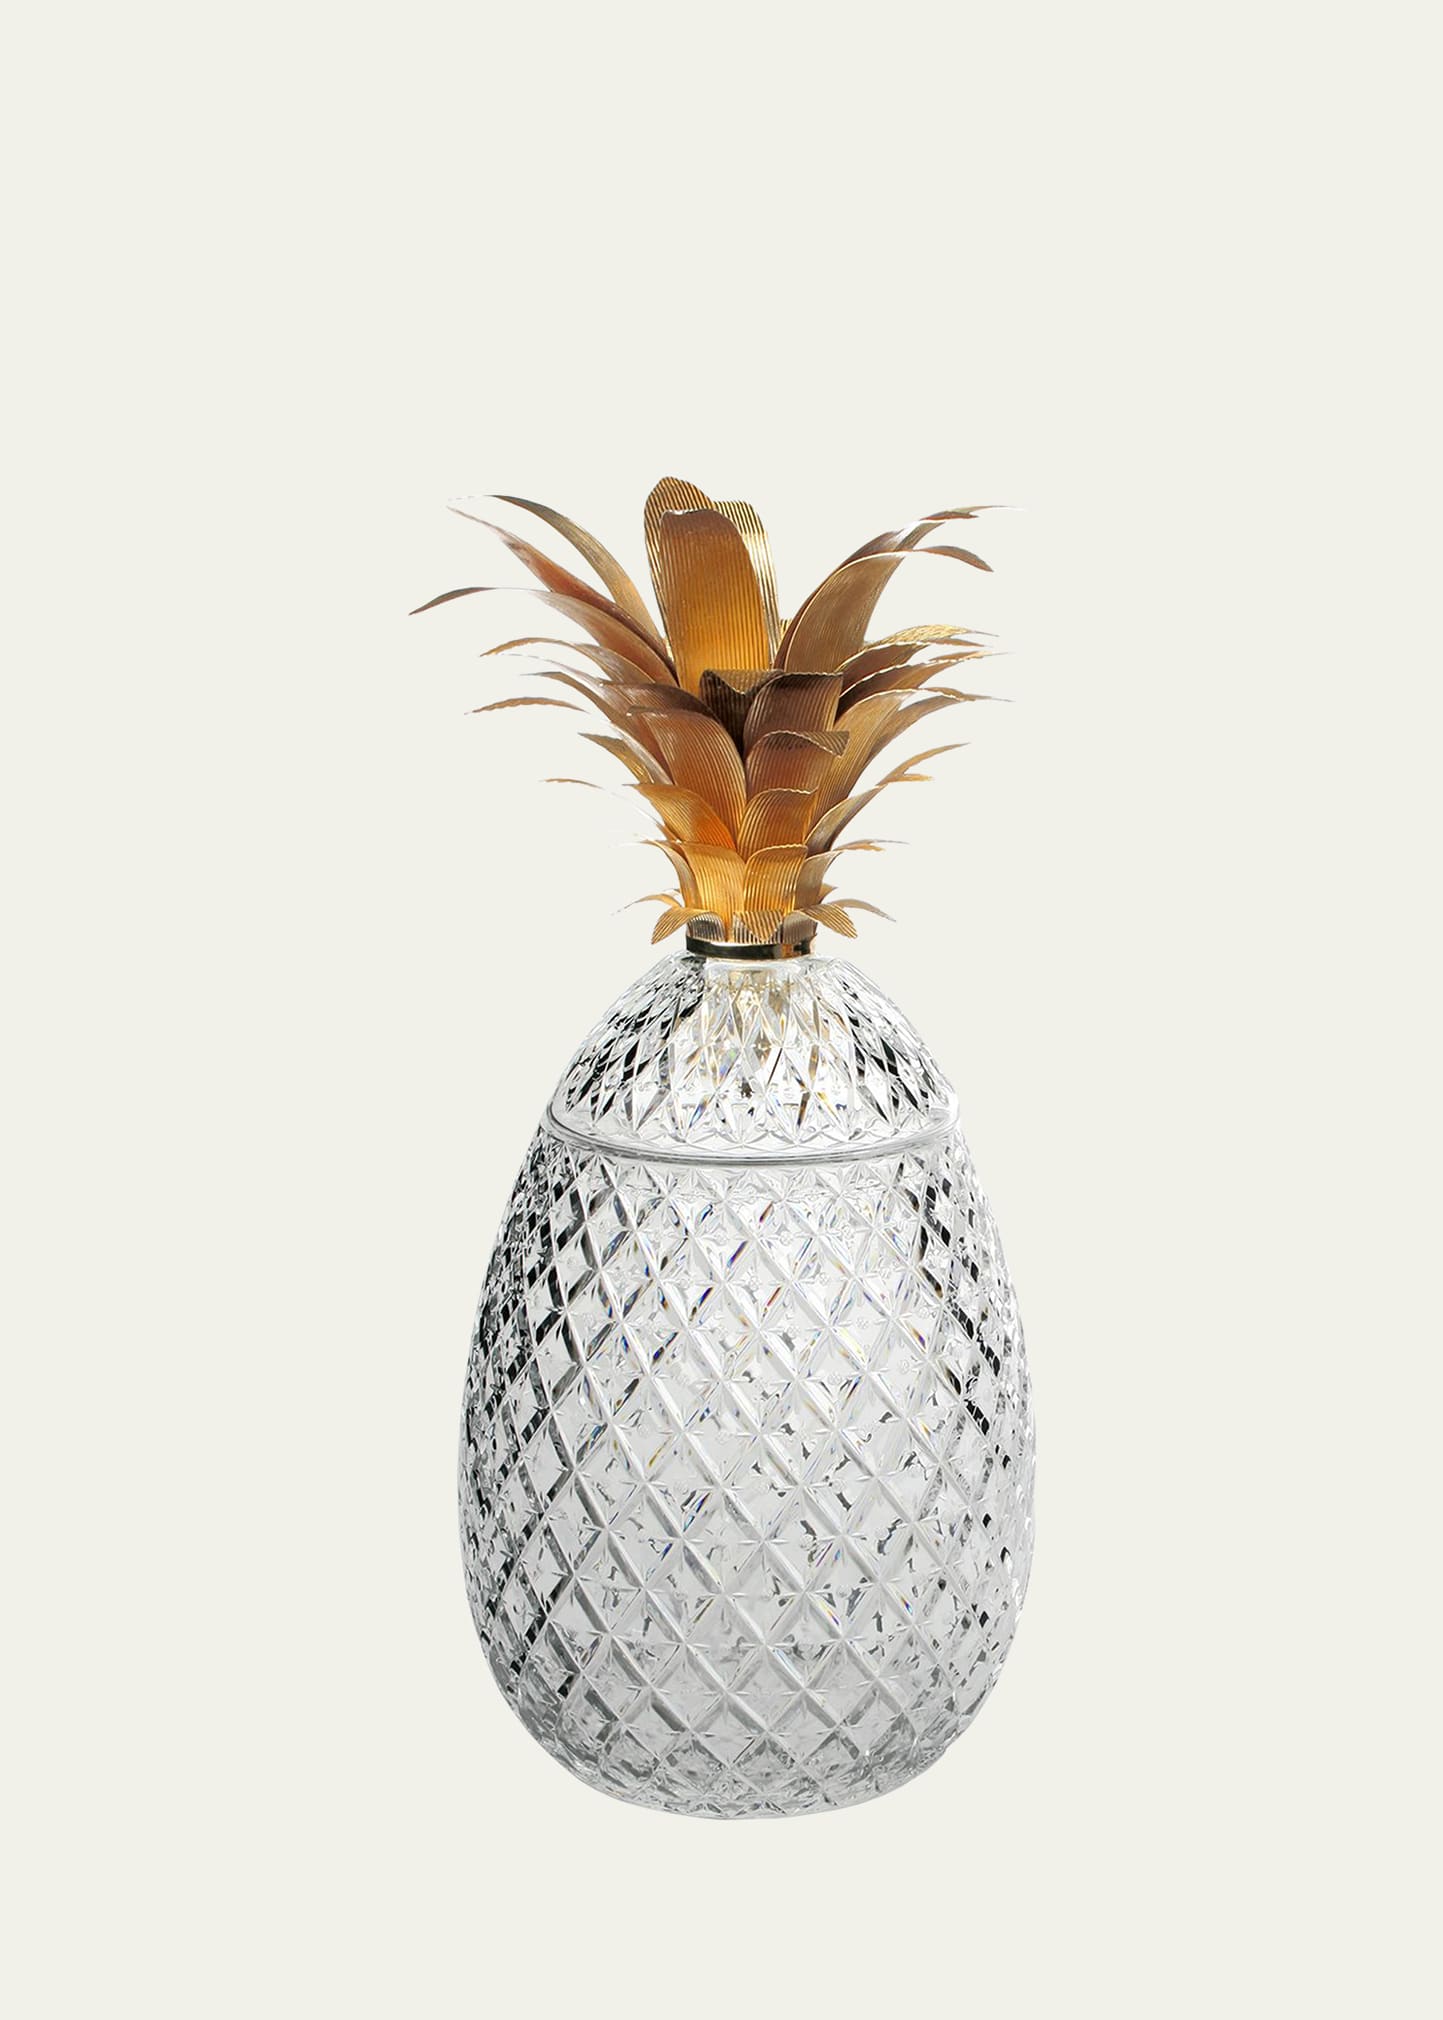 Isadora 26" Gold Pineapple Limited Edition Centerpiece